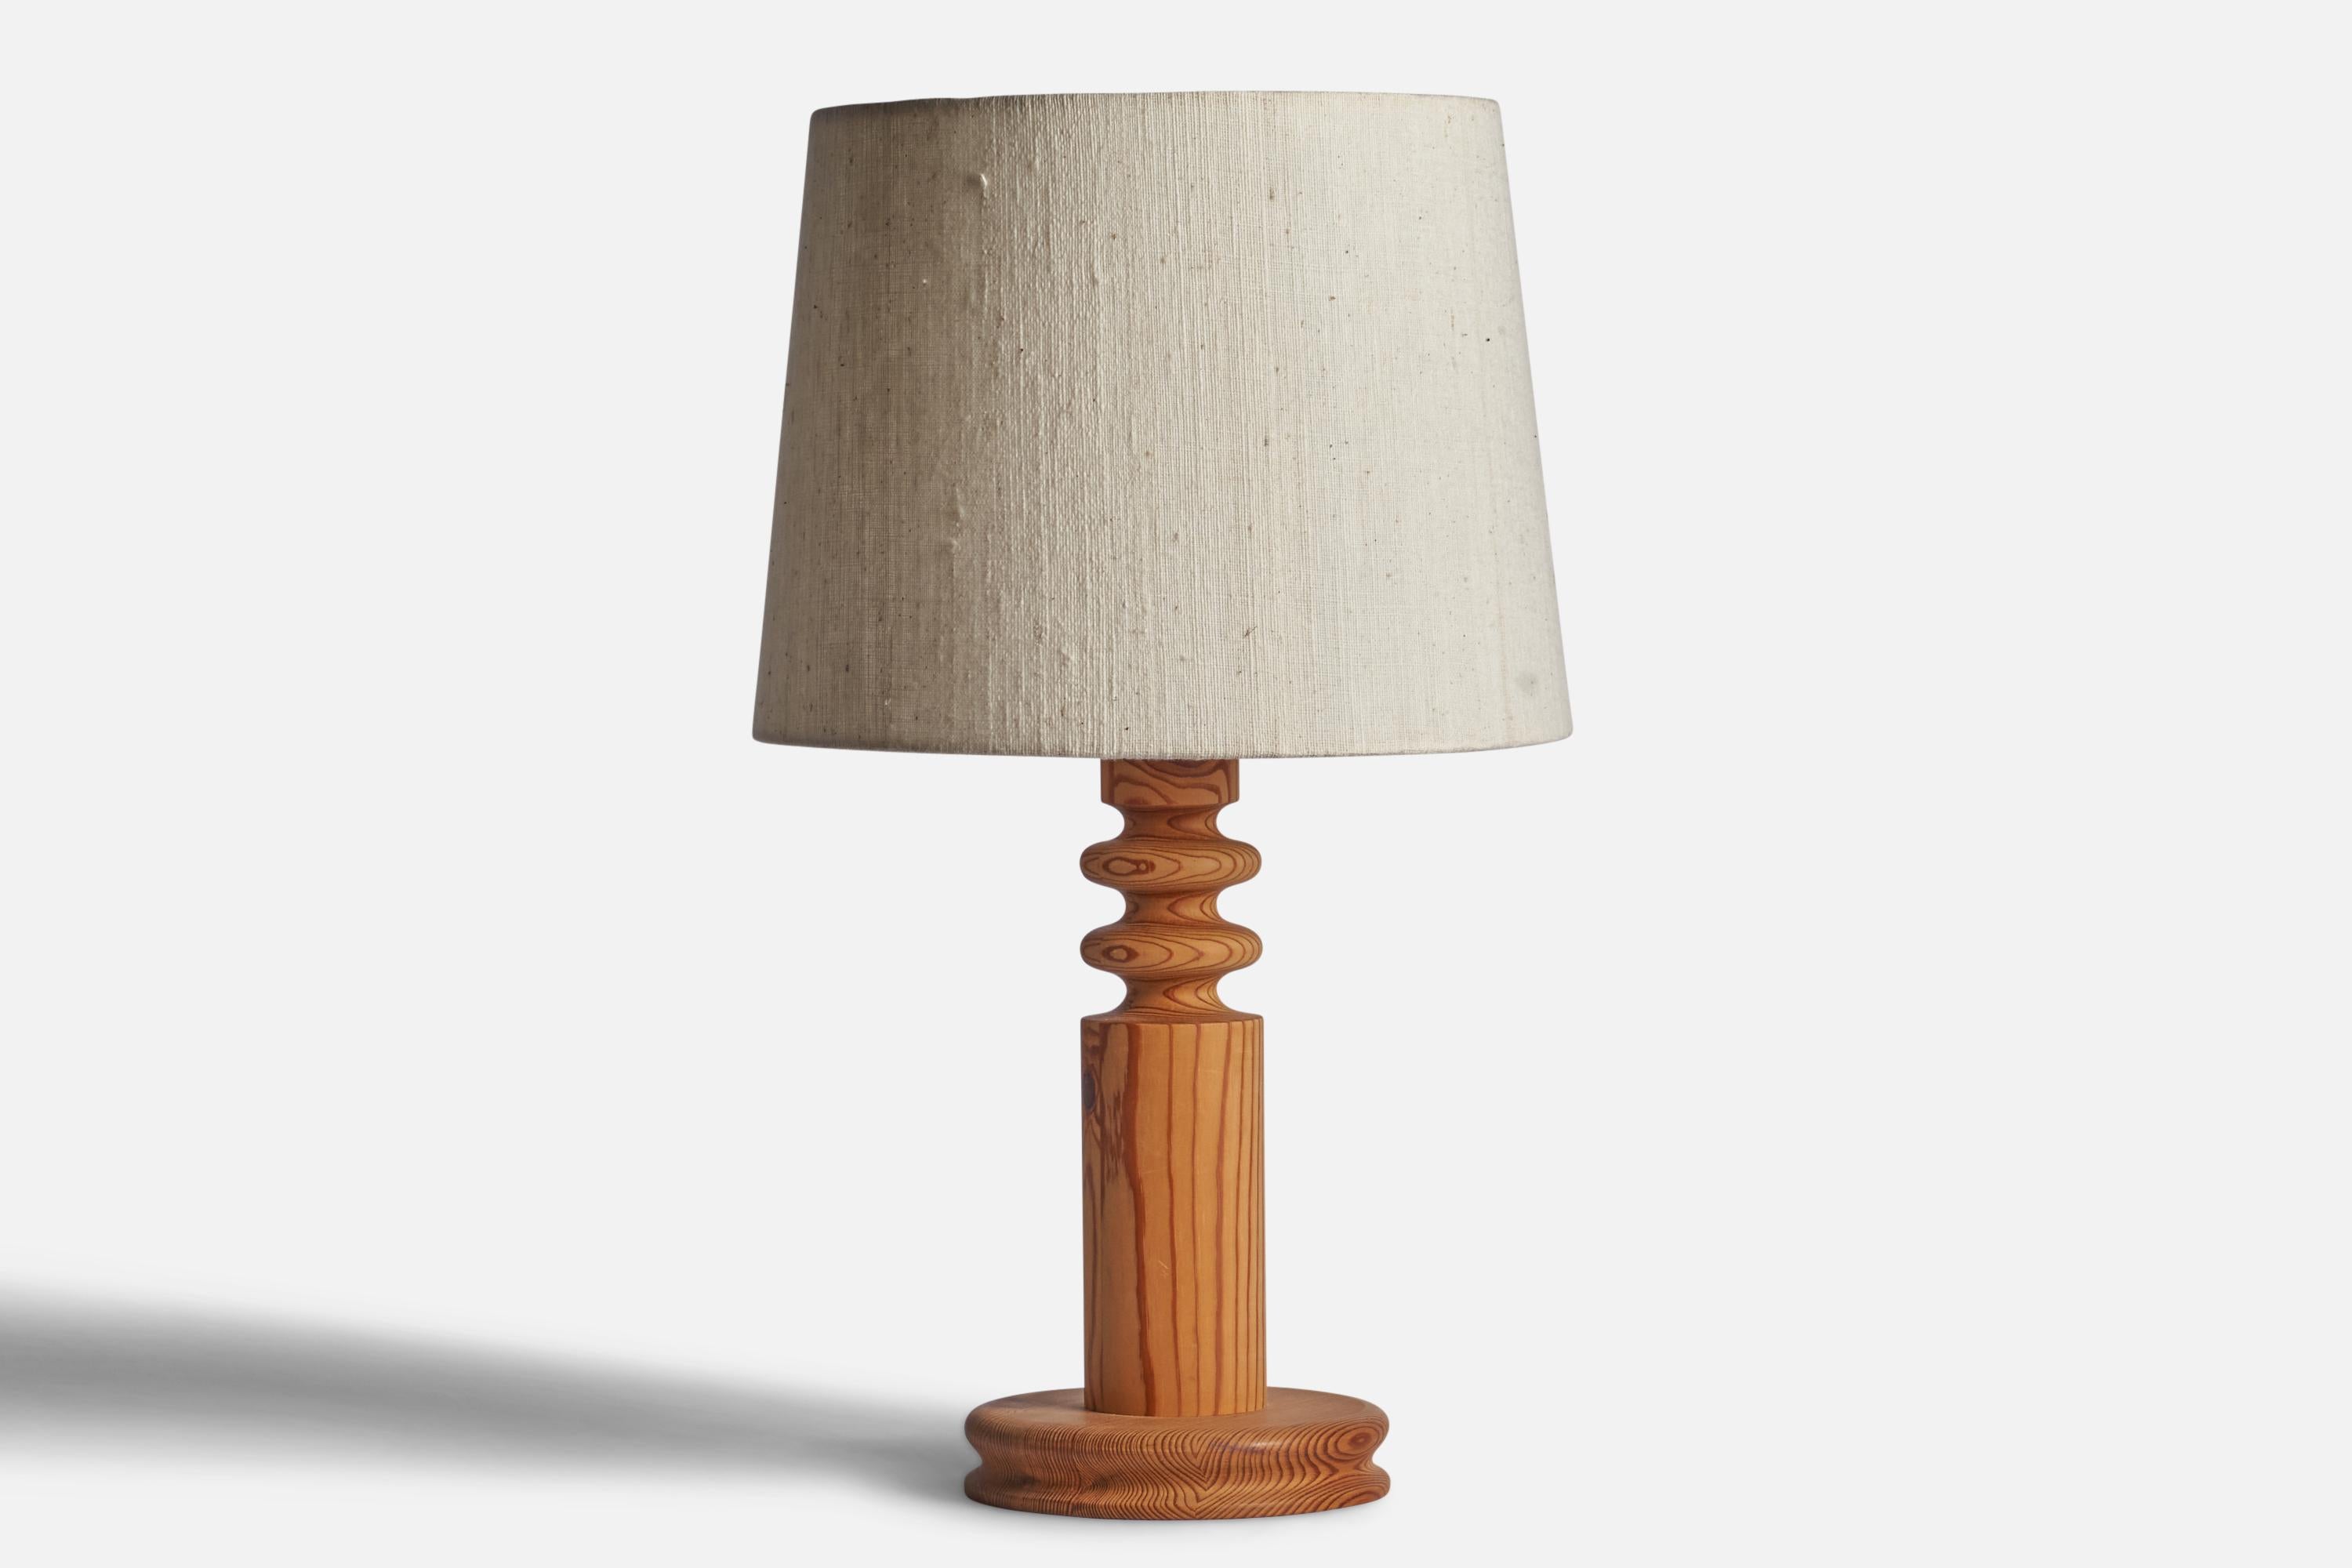 A pine, hand-woven off-white fabric and acrylic table lamp designed by Uno Kristiansson and produced by Luxus Vittsjö, Sweden, c. 1970s.

Overall Dimensions (inches): 25.5” H x 15” Diameter
Bulb Specifications: E-26 Bulb
Number of Sockets: 1
All